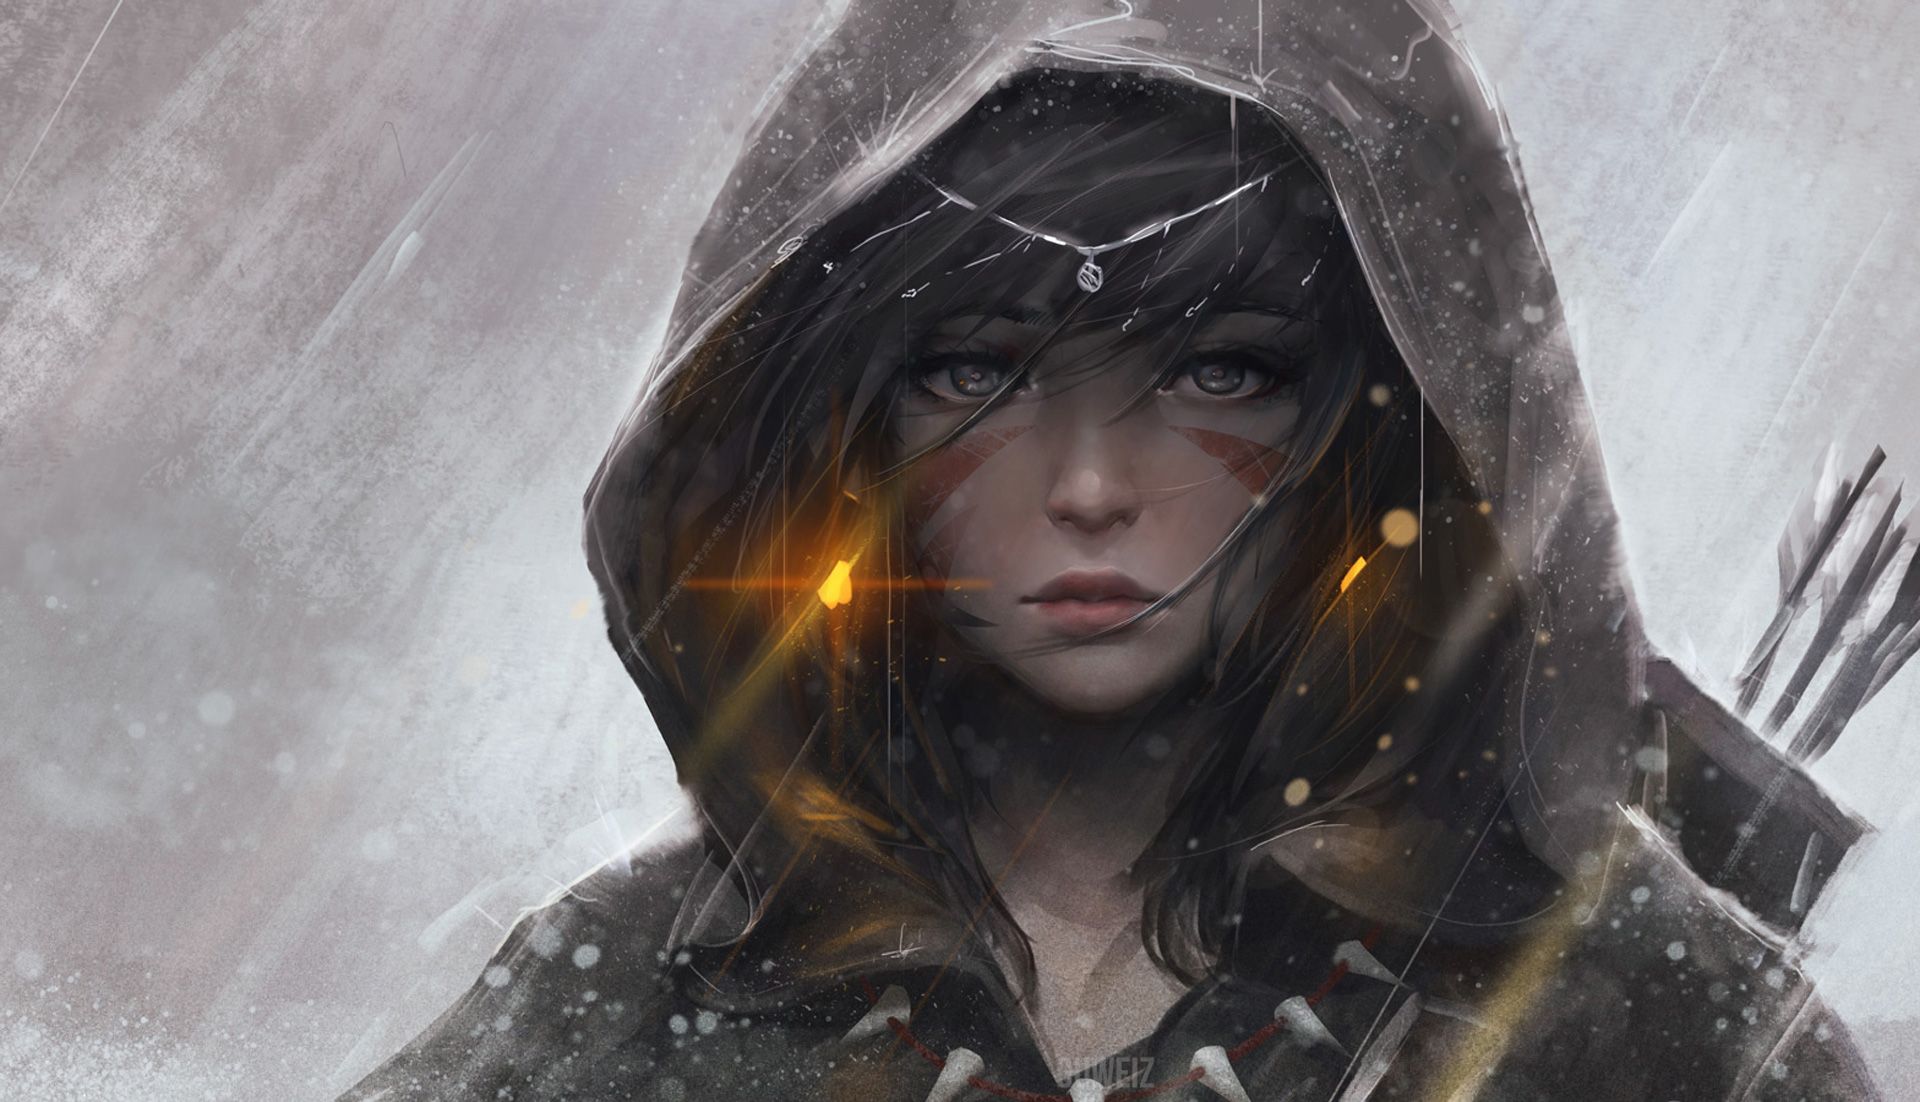 Warrior Girl Hood Artwork, HD Artist, 4k Wallpaper, Image, Background, Photo and Picture